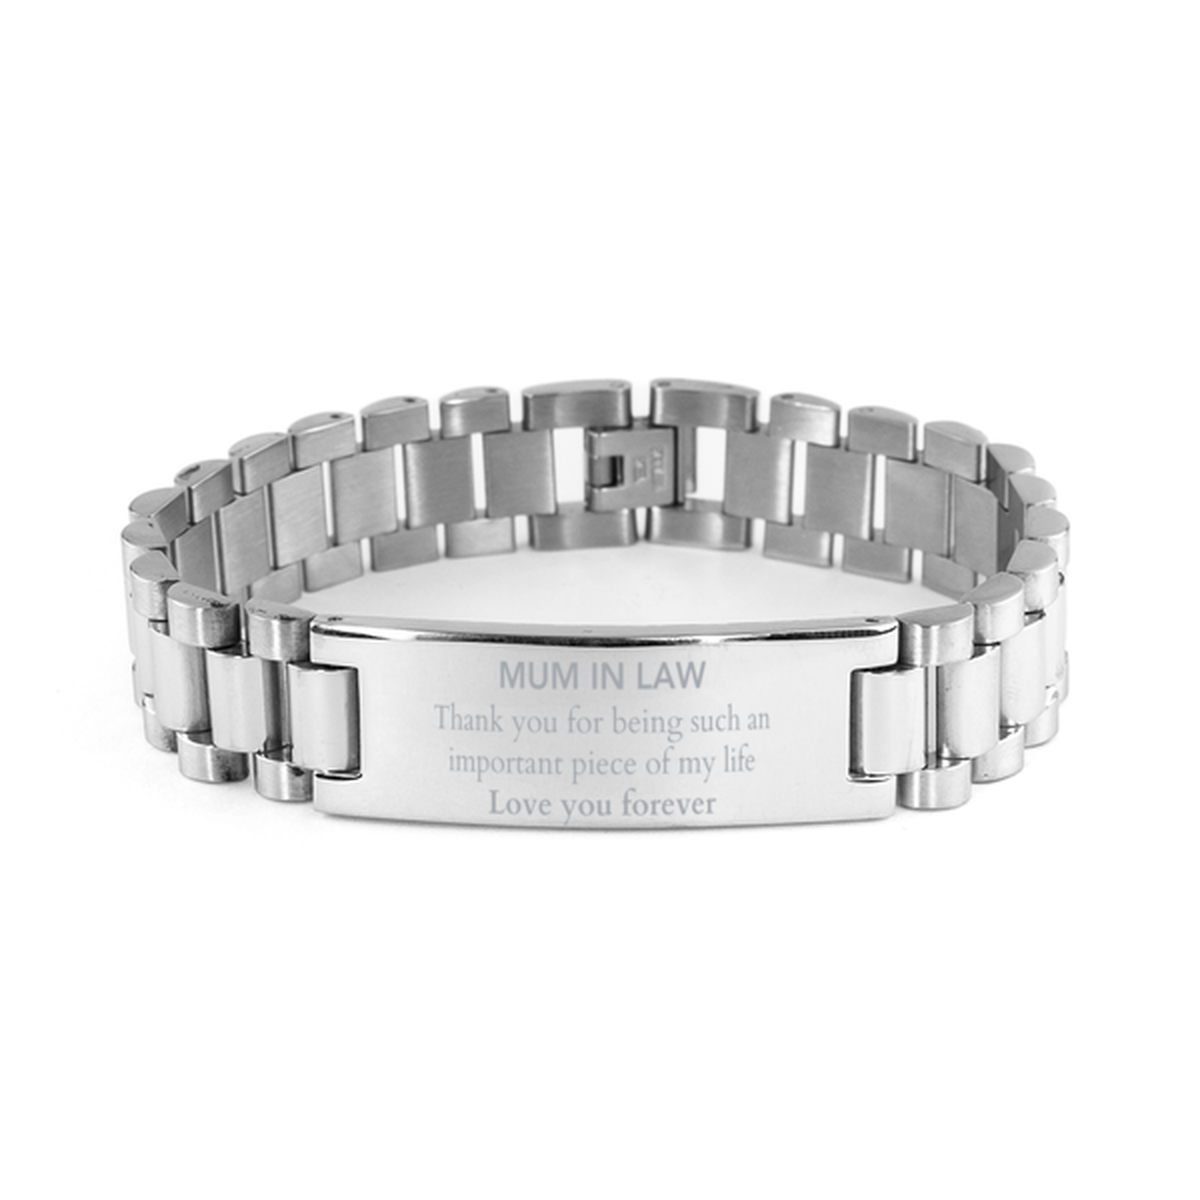 Appropriate Mum In Law  Ladder Stainless Steel Bracelet Epic Birthday Gifts for Mum In Law  Thank you for being such an important piece of my life Mum In Law  Christmas Mothers Fathers Day